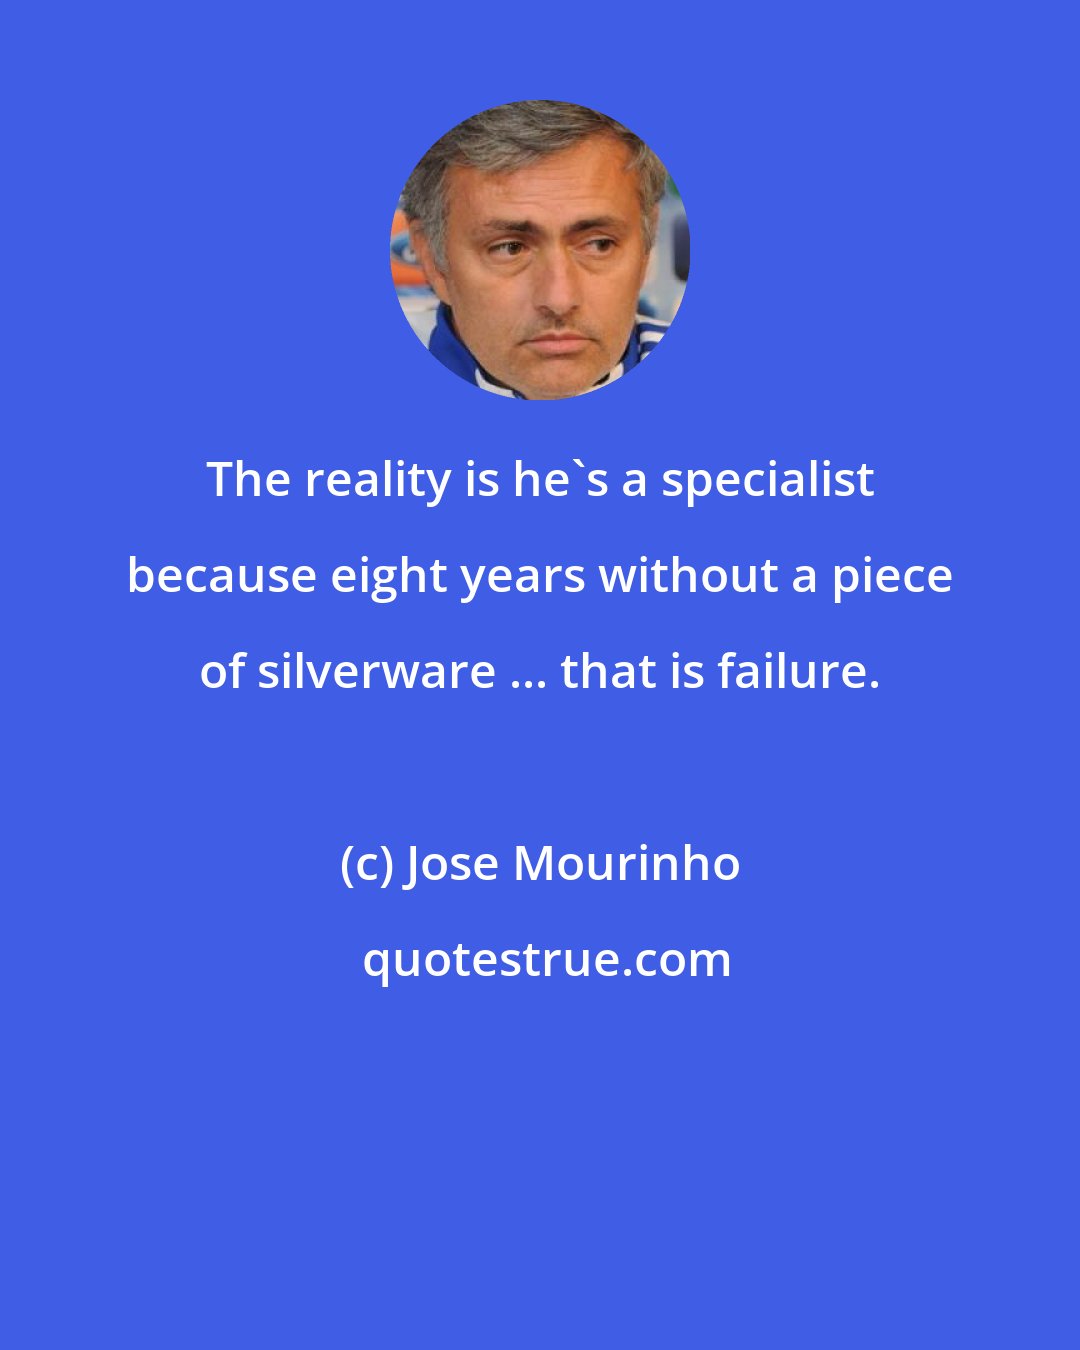 Jose Mourinho: The reality is he's a specialist because eight years without a piece of silverware ... that is failure.